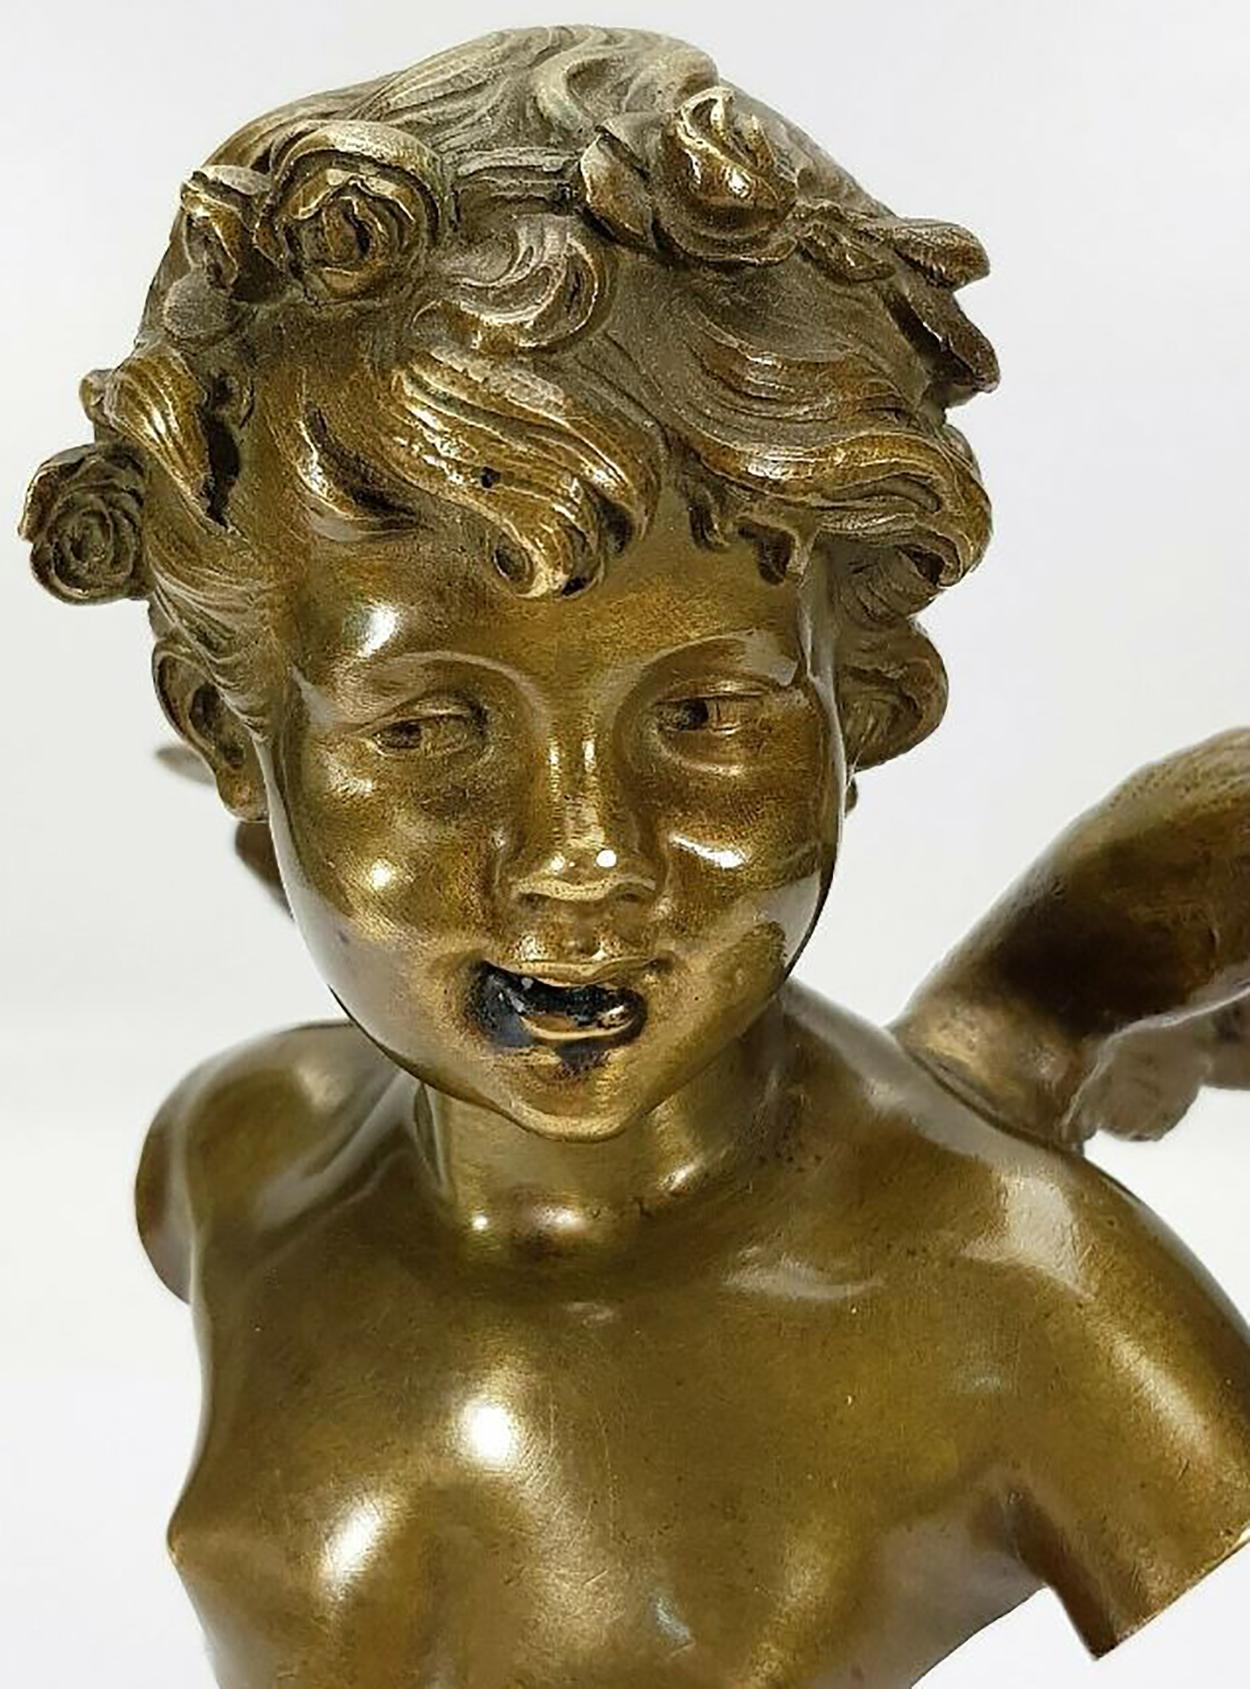 Auguste Moreau bronze angel putto. Original bronze, circa 1890 by Louis Auguste Moreau, (France, 1855-1919)

Depiction of a female angel with wings and rosary in curly hair.

Wonderful patina, very fine execution. Signature below the left